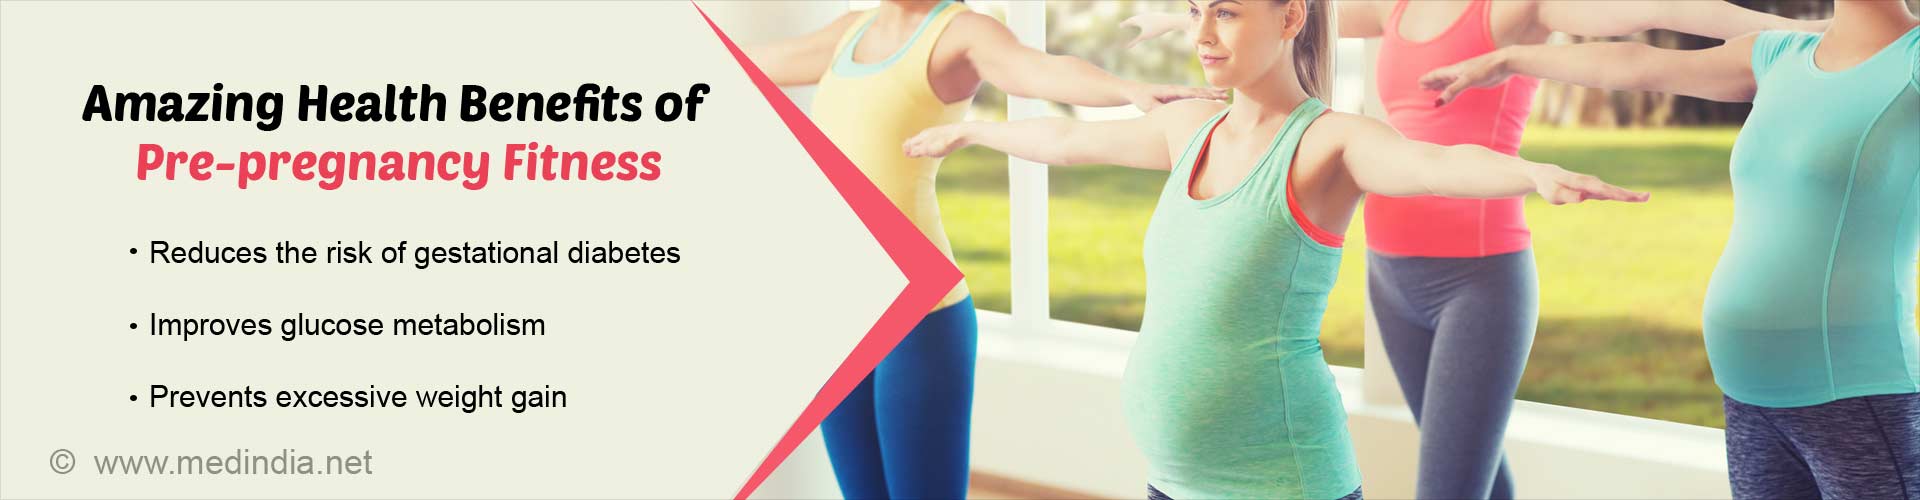 Amazing health benefits of pre-pregnancy fitness
- reduces the risk of gestational diabetes
- improves glucose metabolism
- prevents excessive weight gain